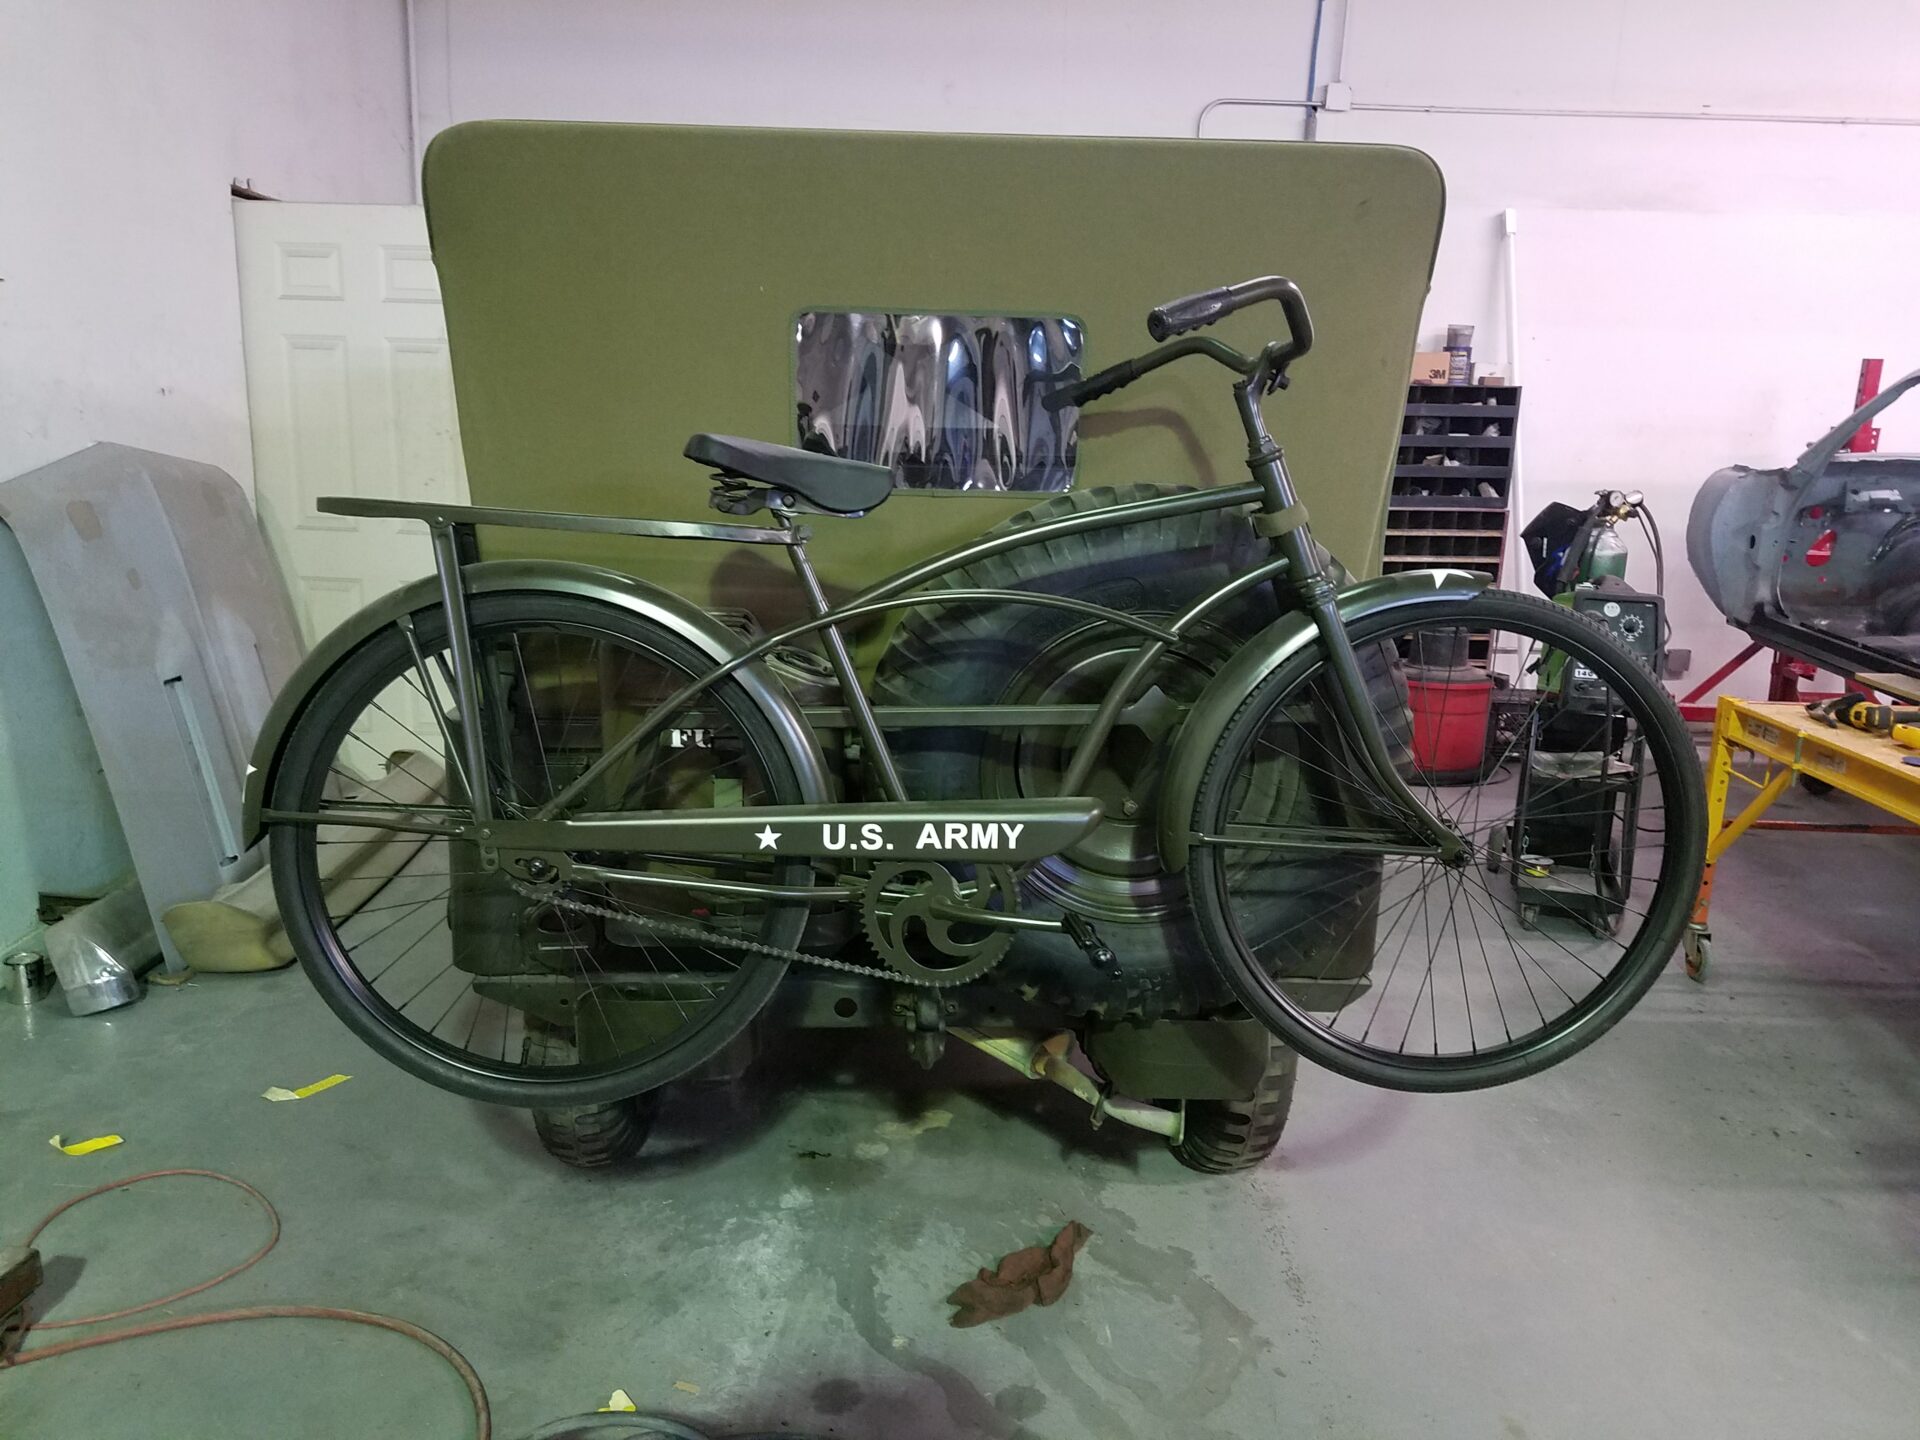 A bike attached behind the 1953 Military Jeep